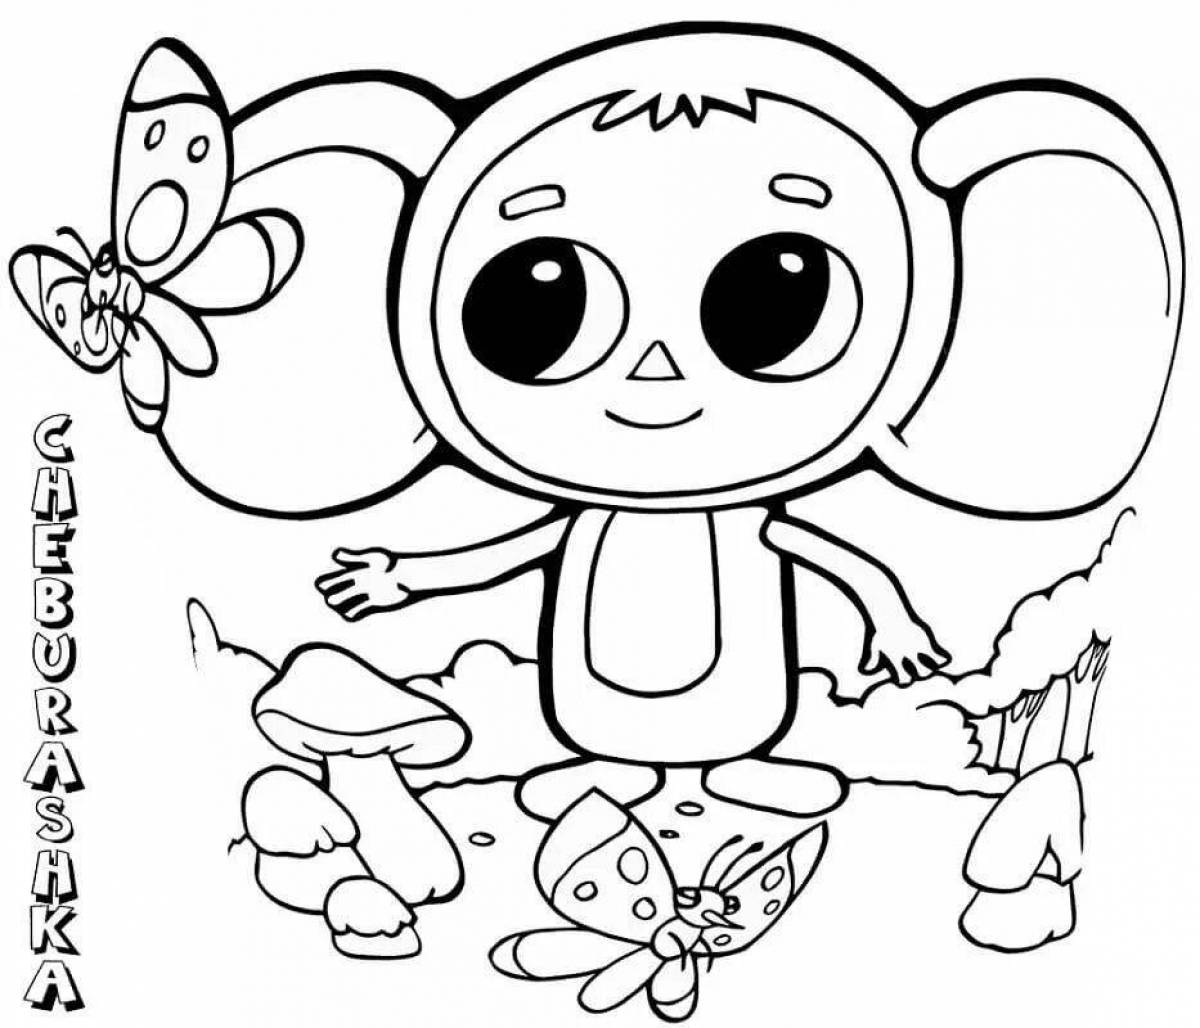 Exciting Cheburashka coloring book for children 4-5 years old